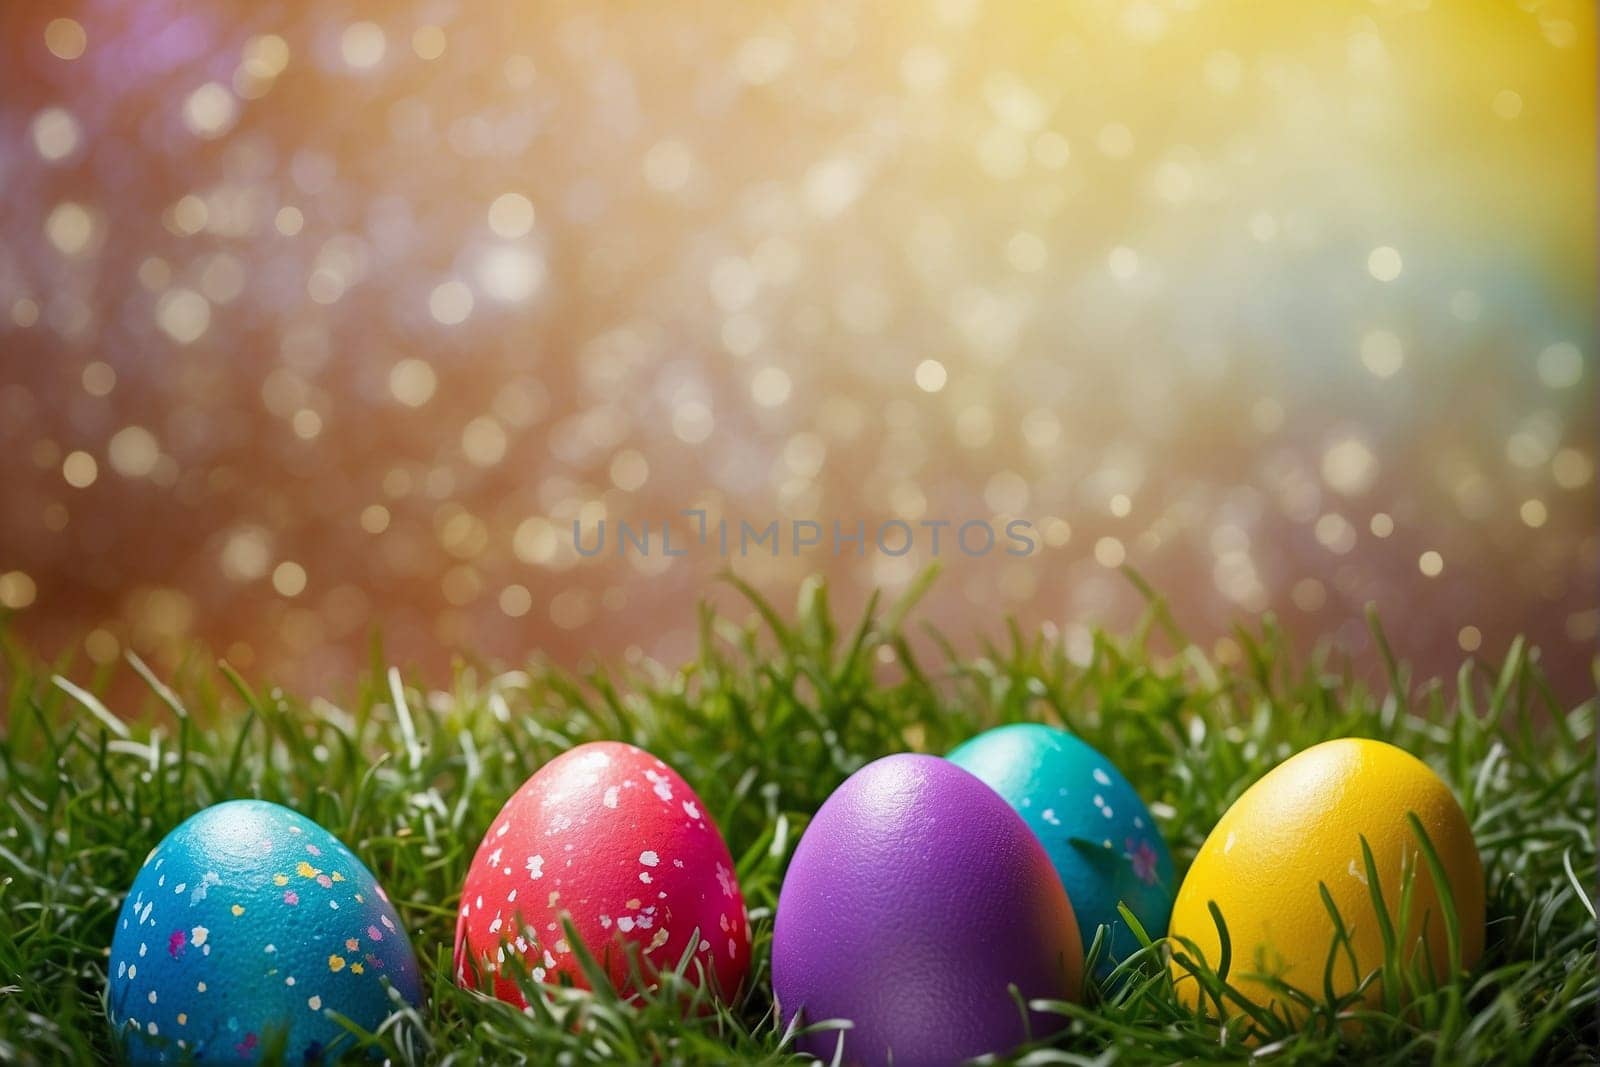 A vibrant collection of Easter eggs arranged together on the green grass.